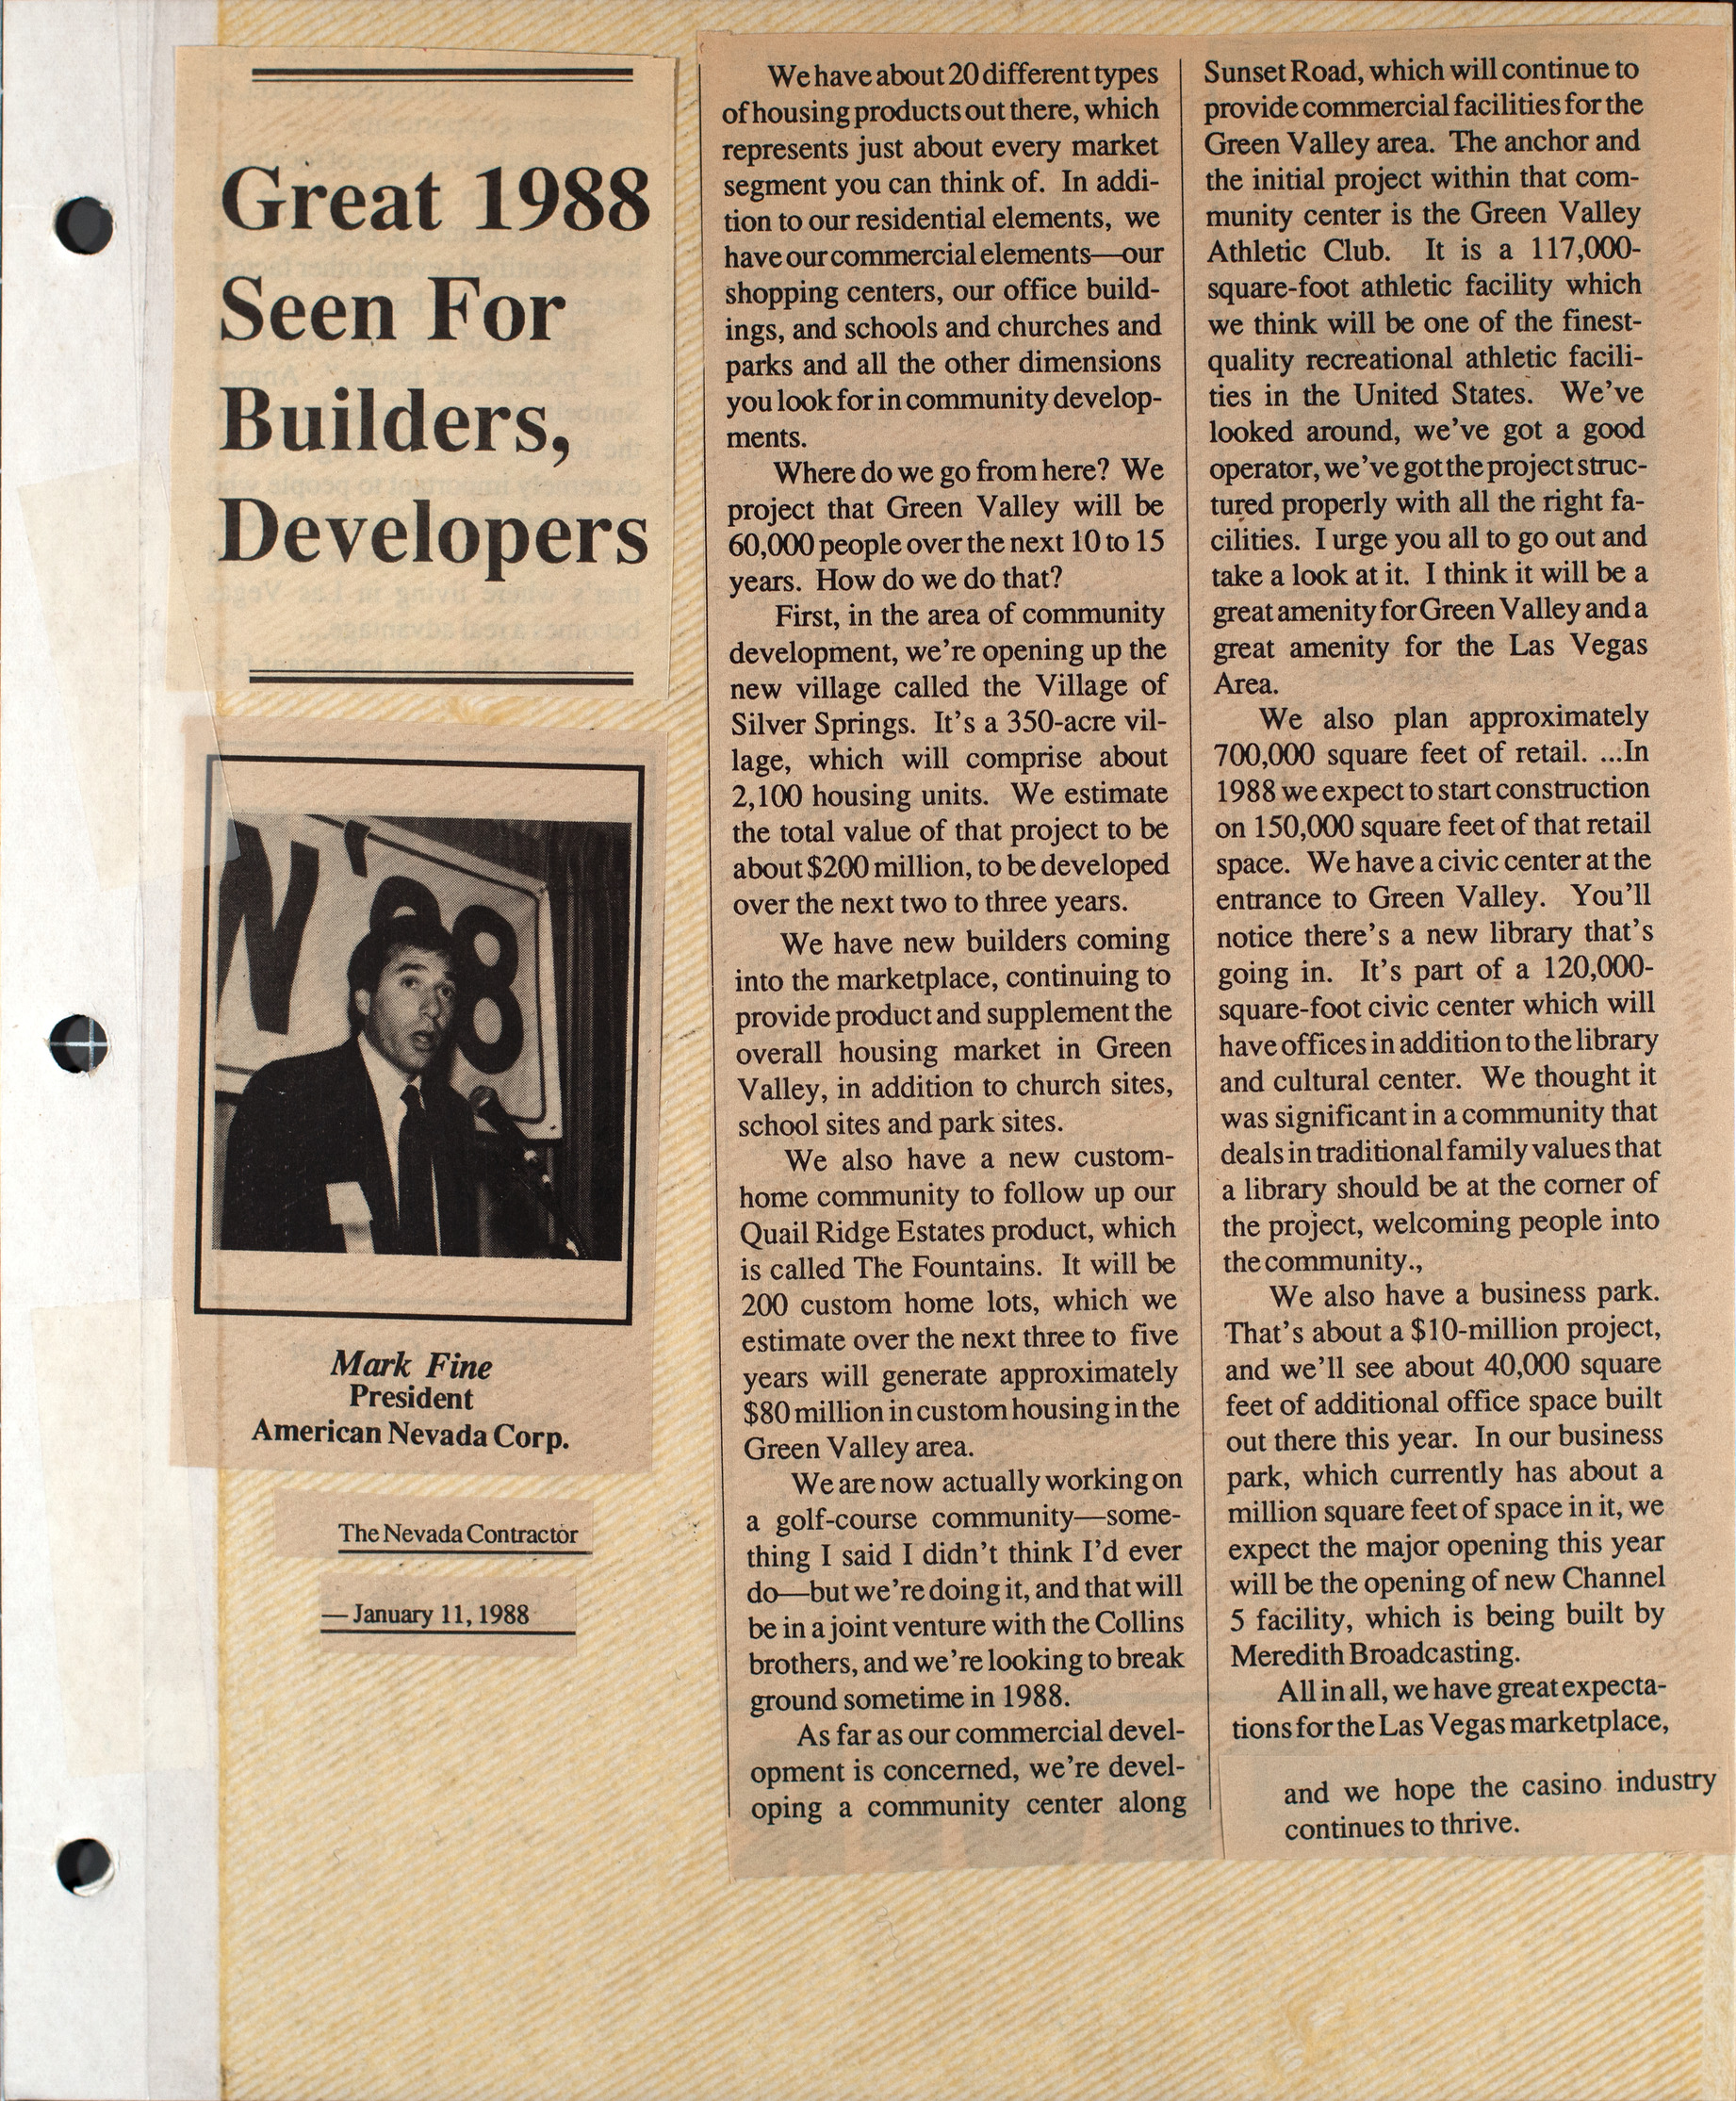 Clipping, Great 1988 seen for builders, developers, The Nevada Contractor, January 11, 1988